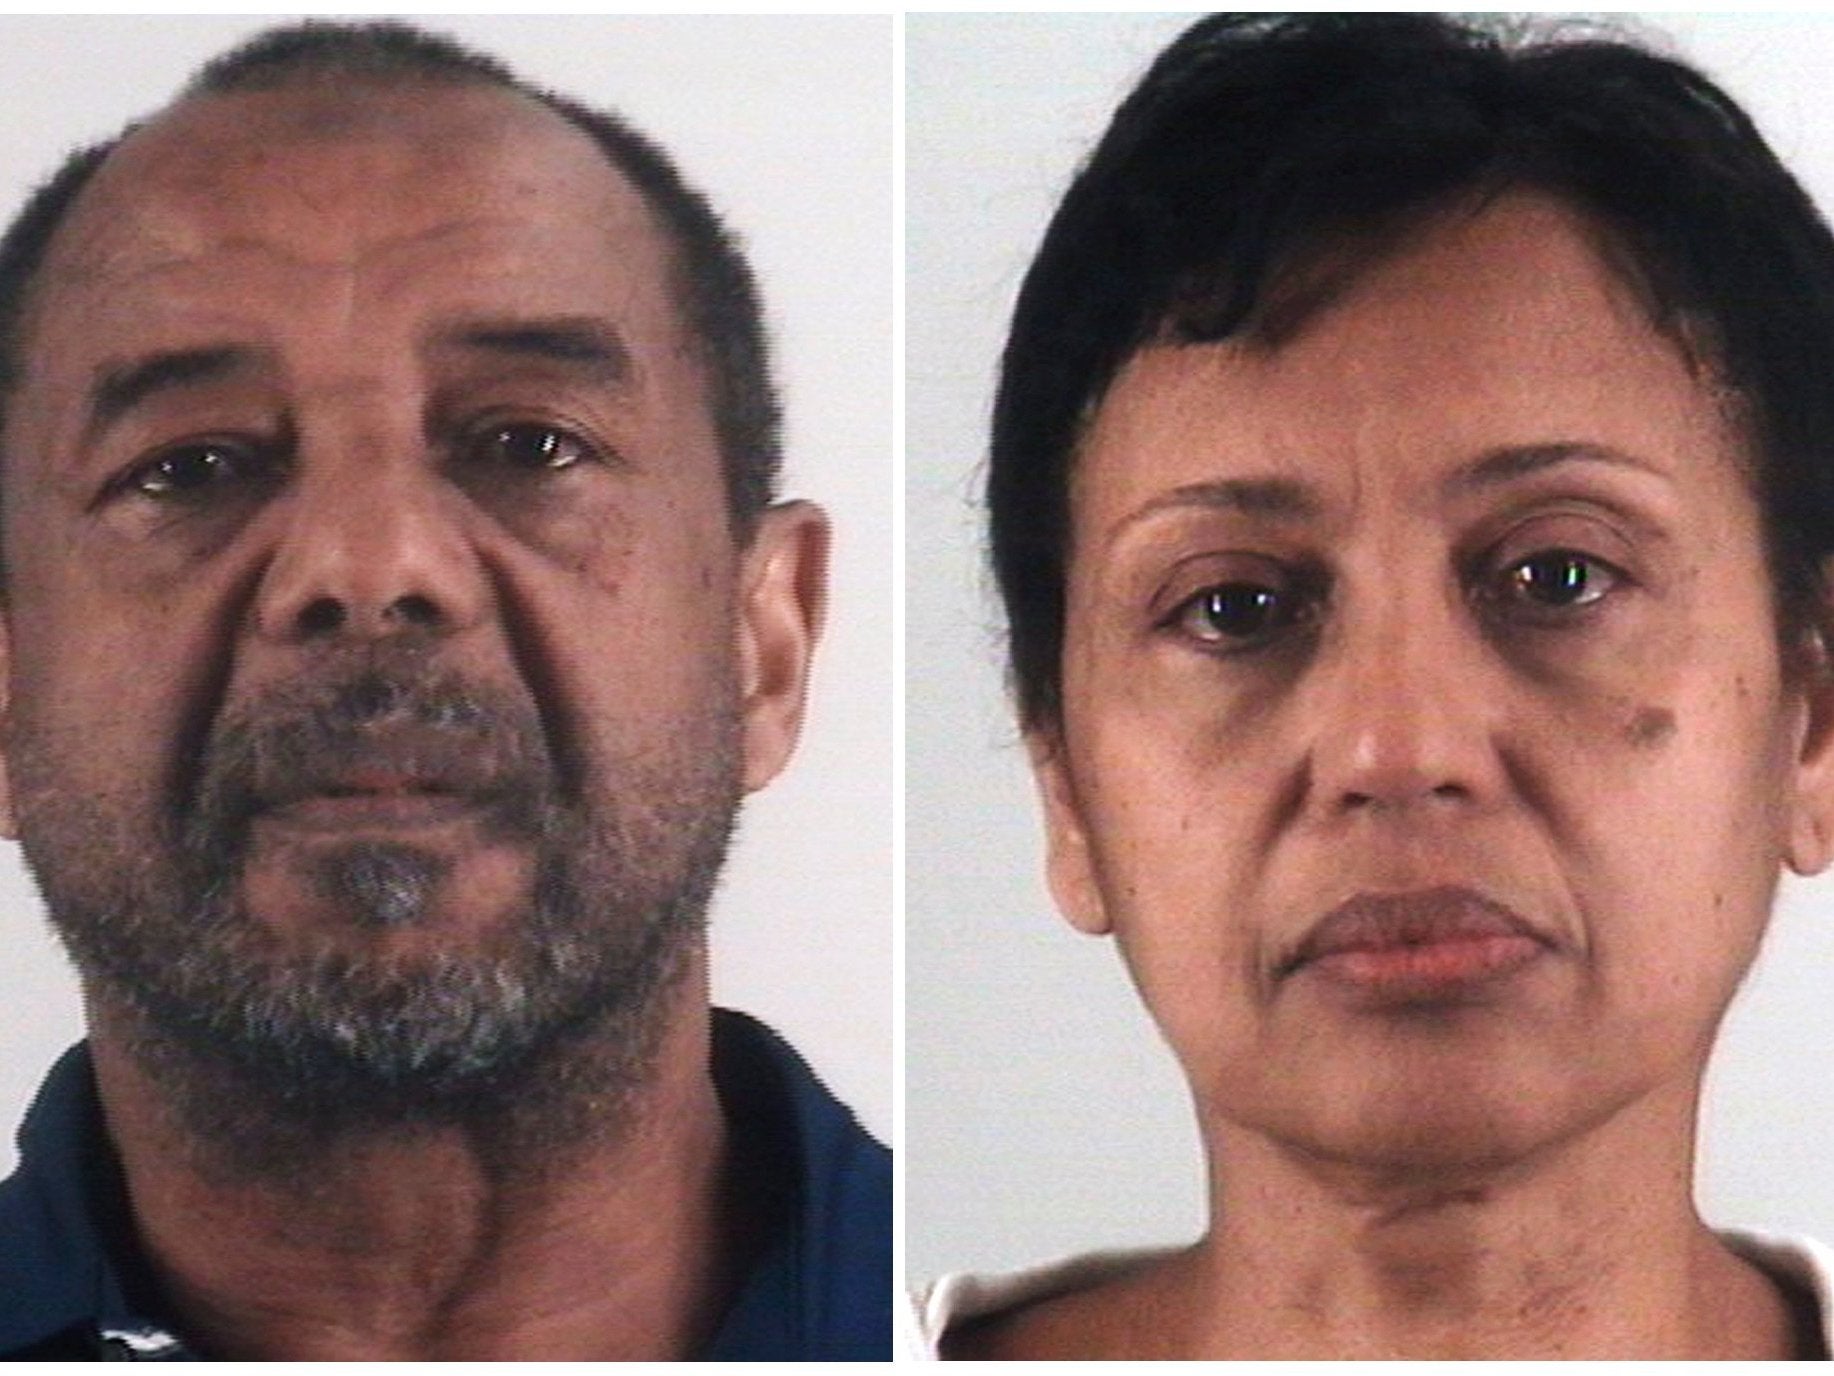 Mohamed Toure, left, and Denise Cros-Toure, accused of enslaving a Guinean woman for 16 years were sentenced to seven years in prison each for enslaving a woman for 16 years.